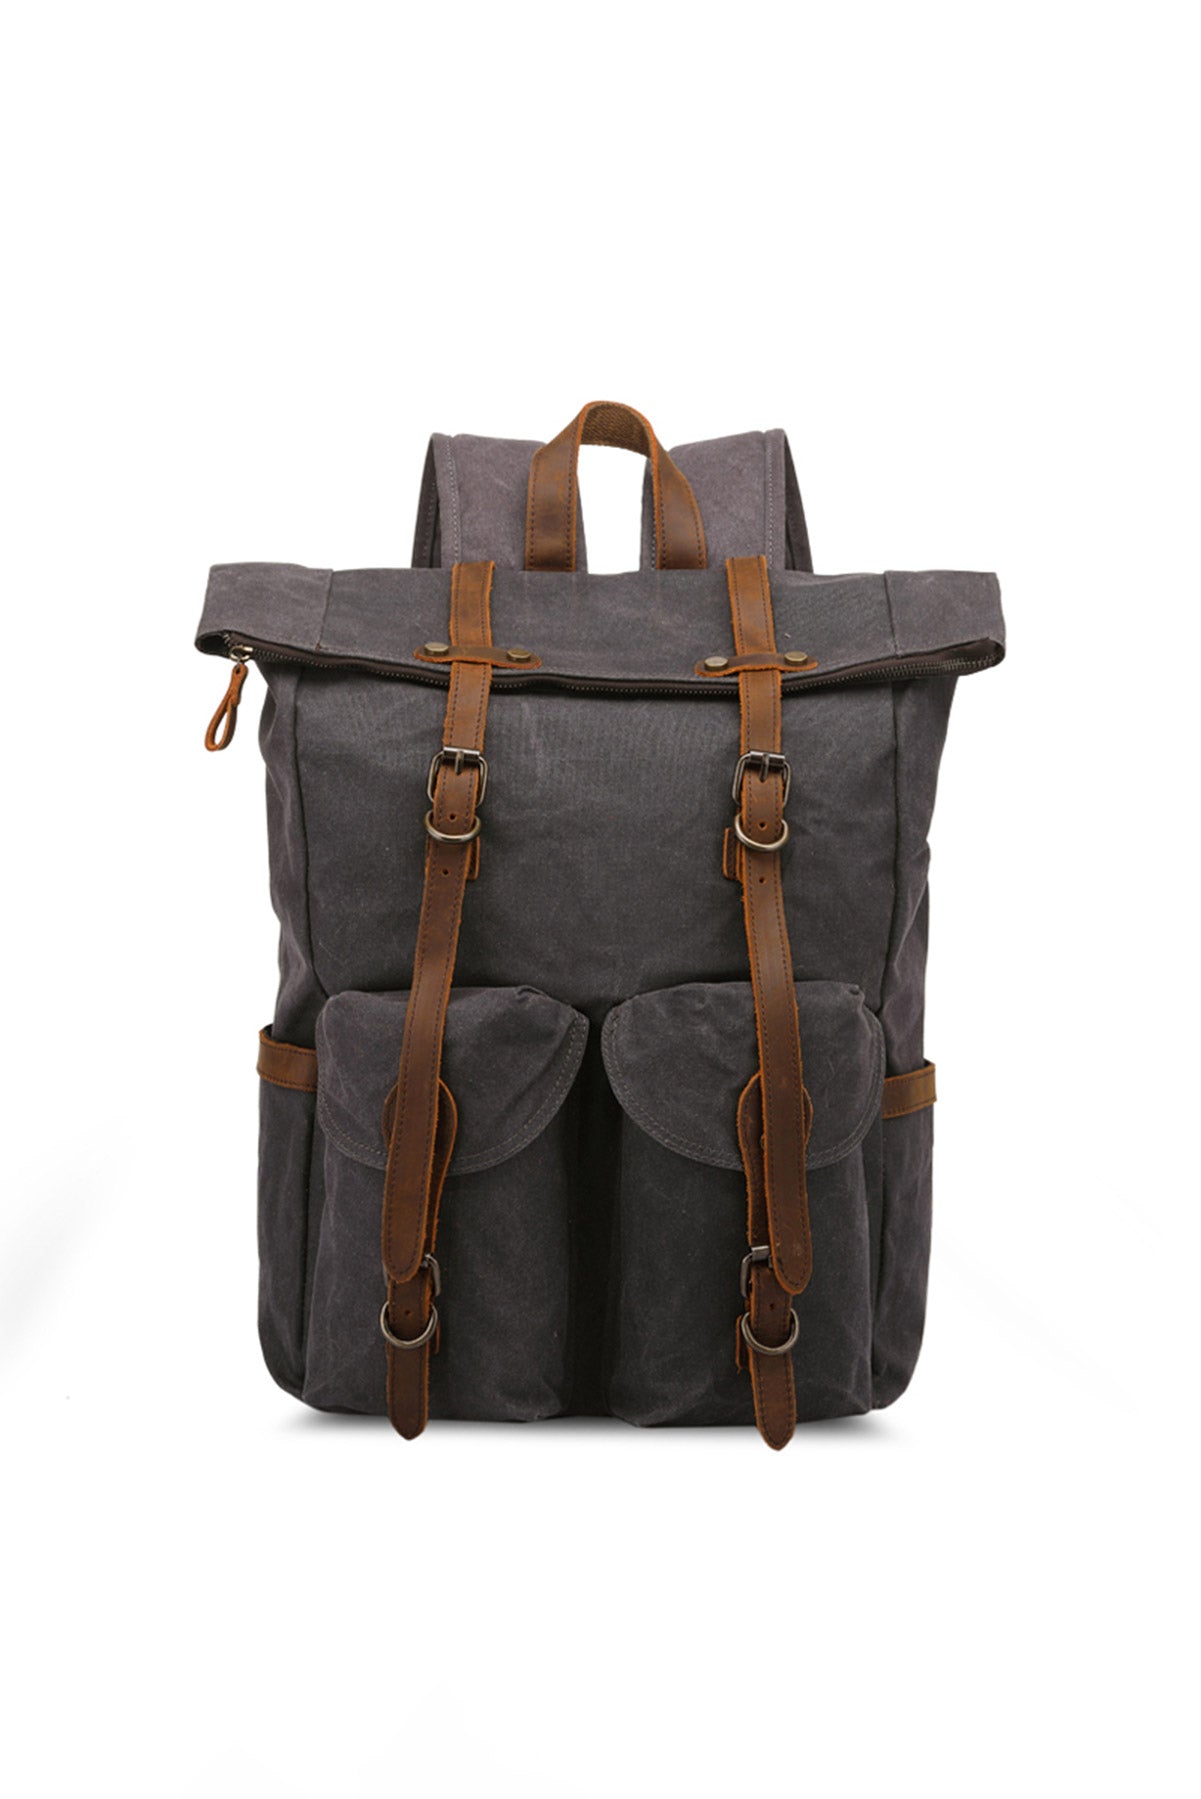 The Roadster Backpack